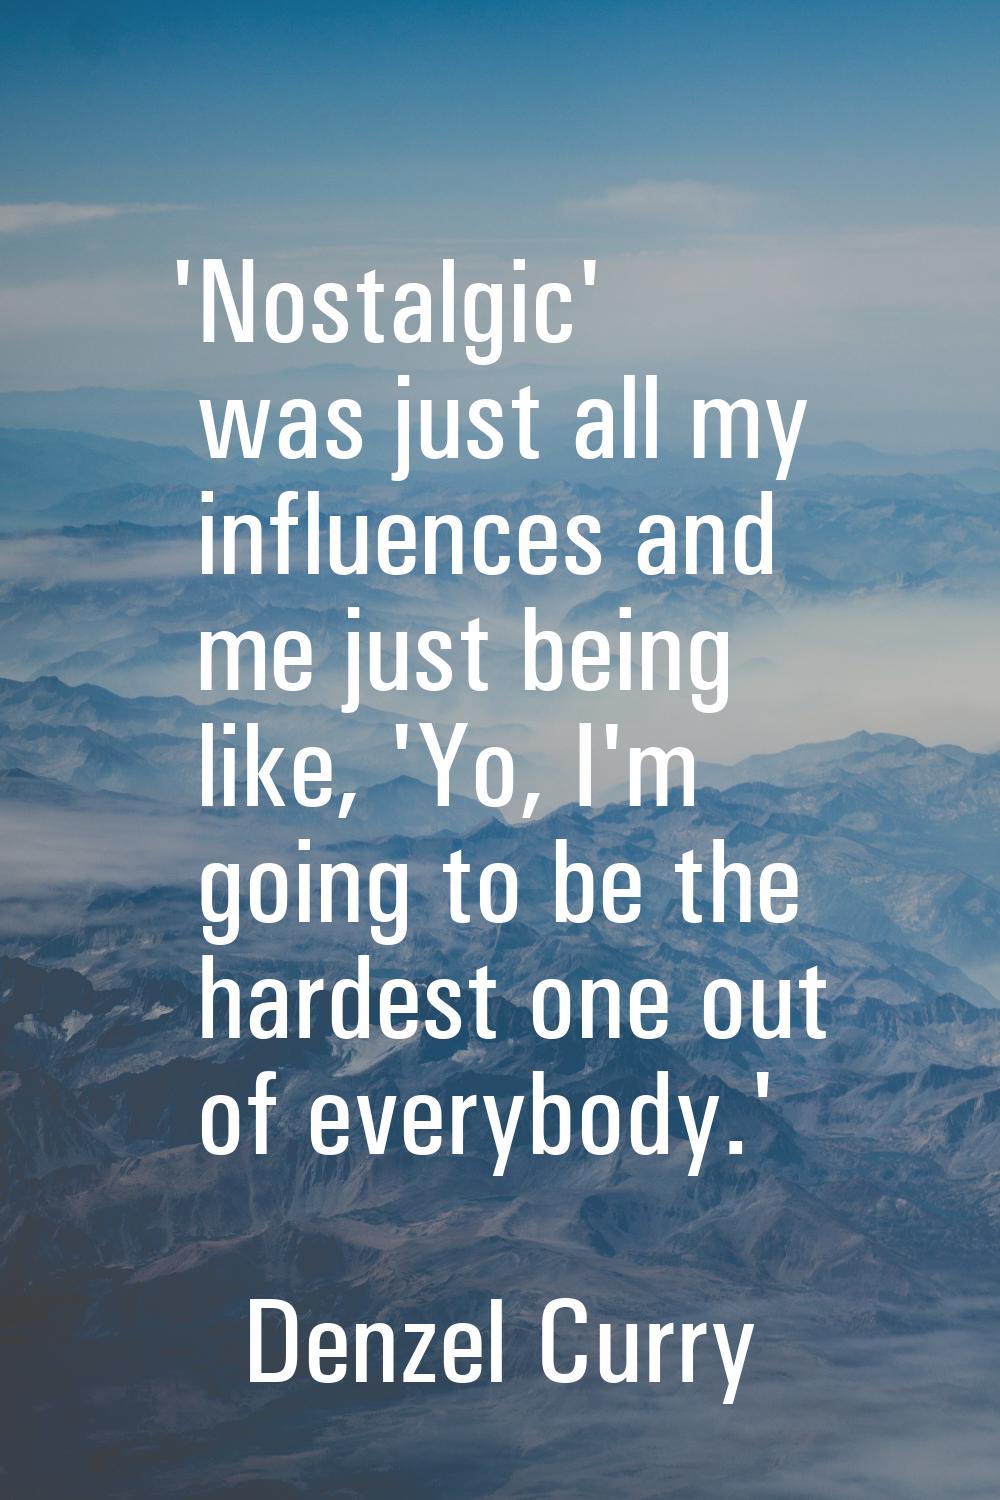 'Nostalgic' was just all my influences and me just being like, 'Yo, I'm going to be the hardest one